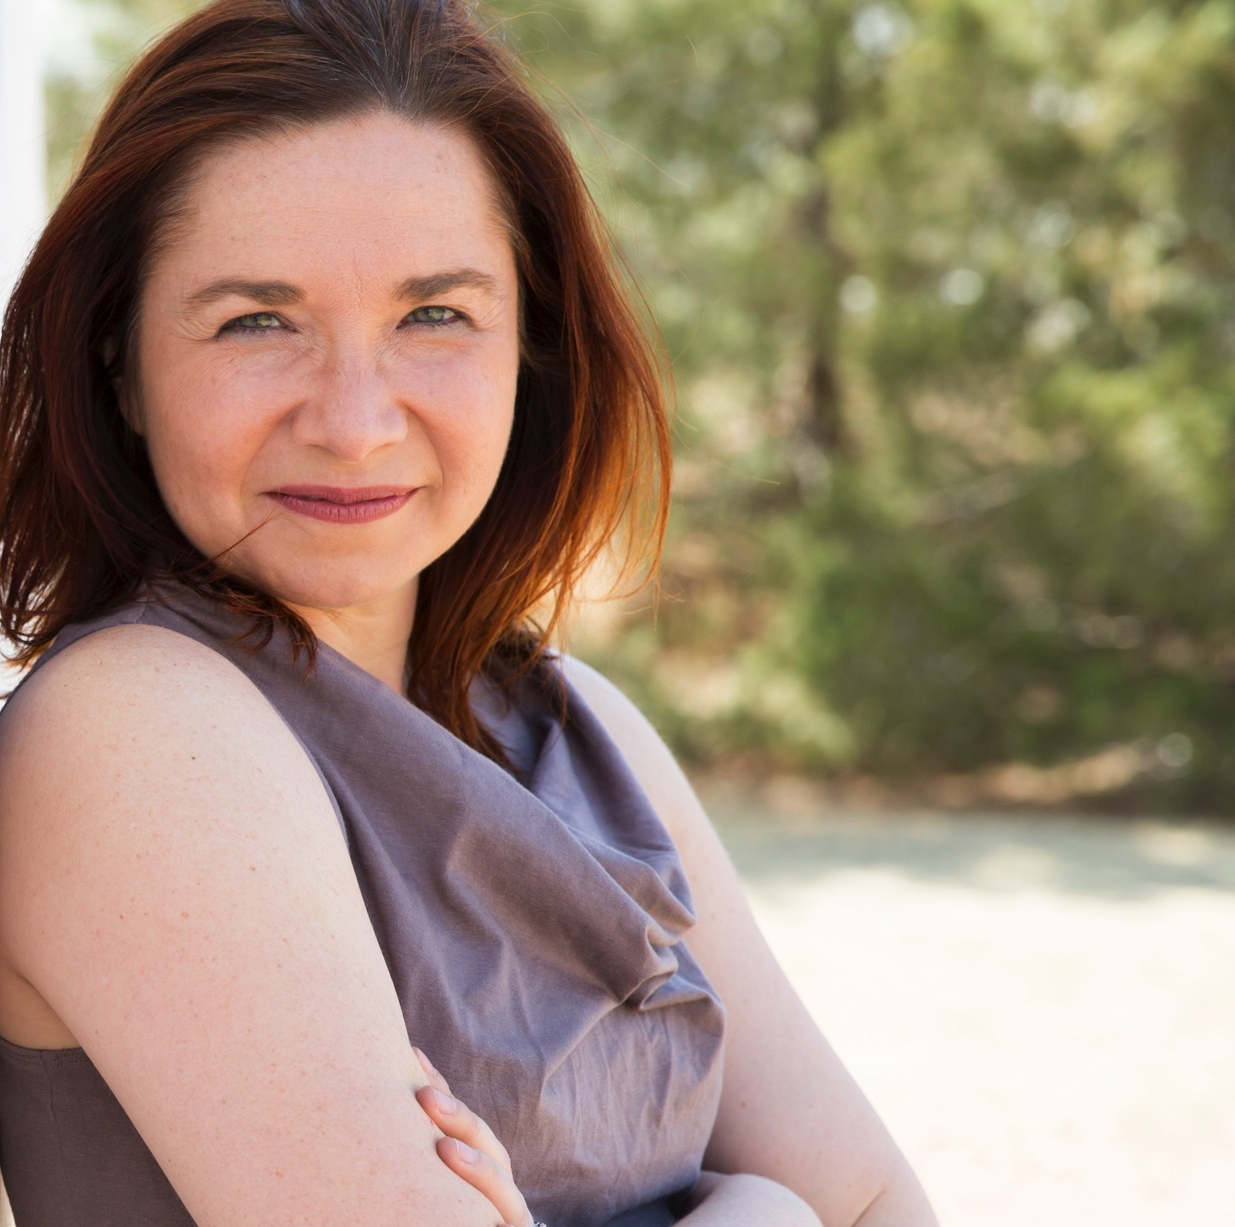 Portrait of Dr. Katharine Hayhoe, atmospheric scientist and professor of political science at Texas Tech University. Photo: Katharine Hayhoe